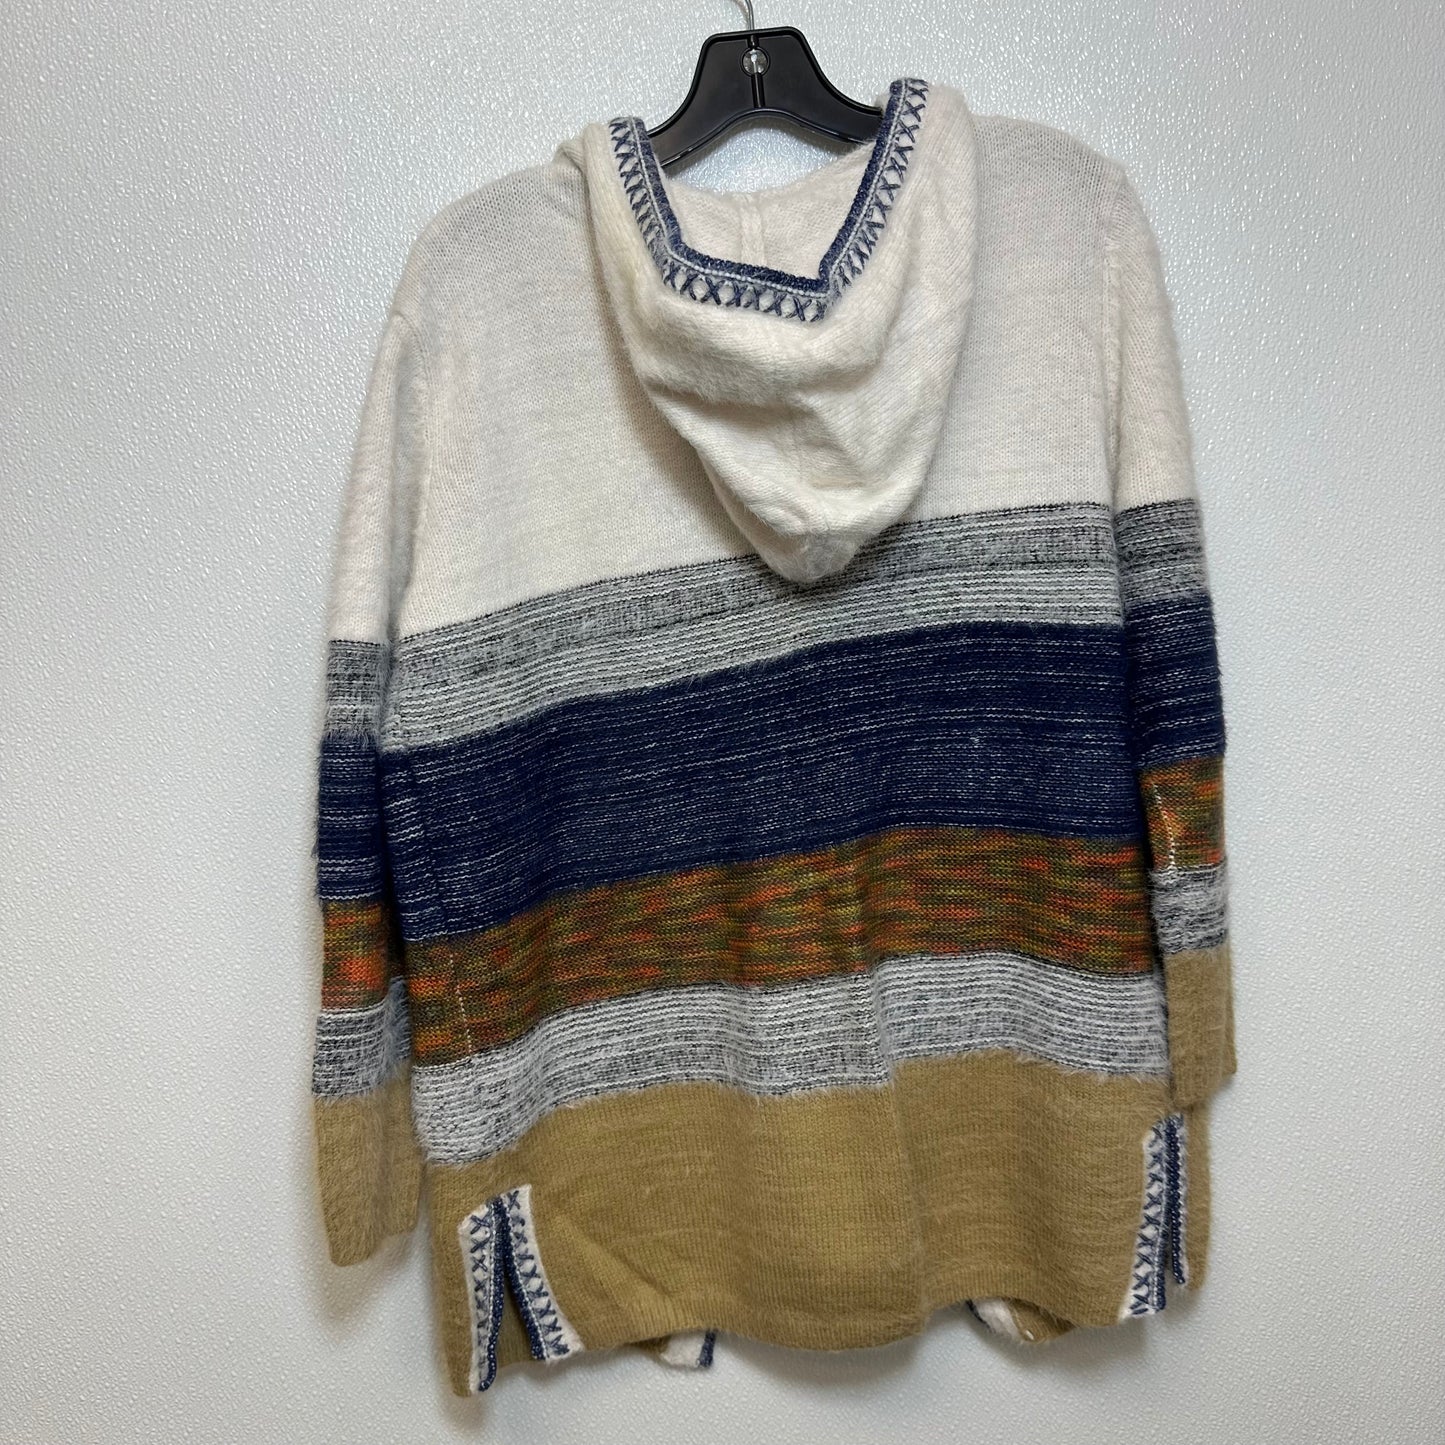 Cardigan By Fate  Size: S